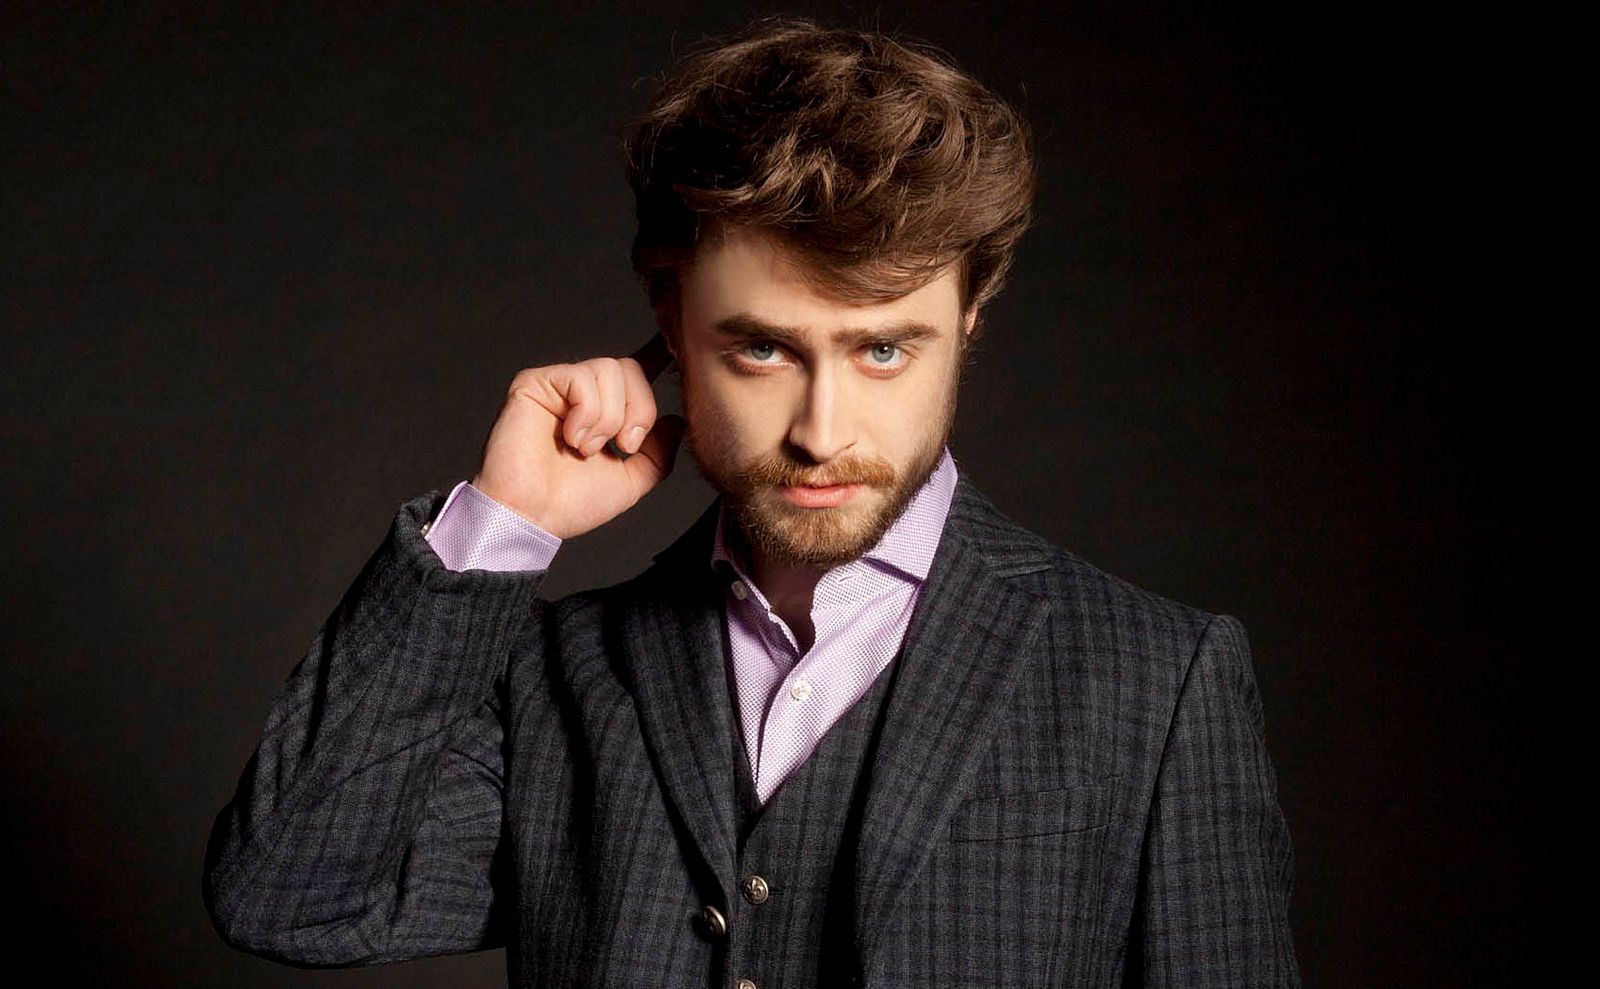 Daniel Radcliffe Is Always Ready To Play Harry Potter